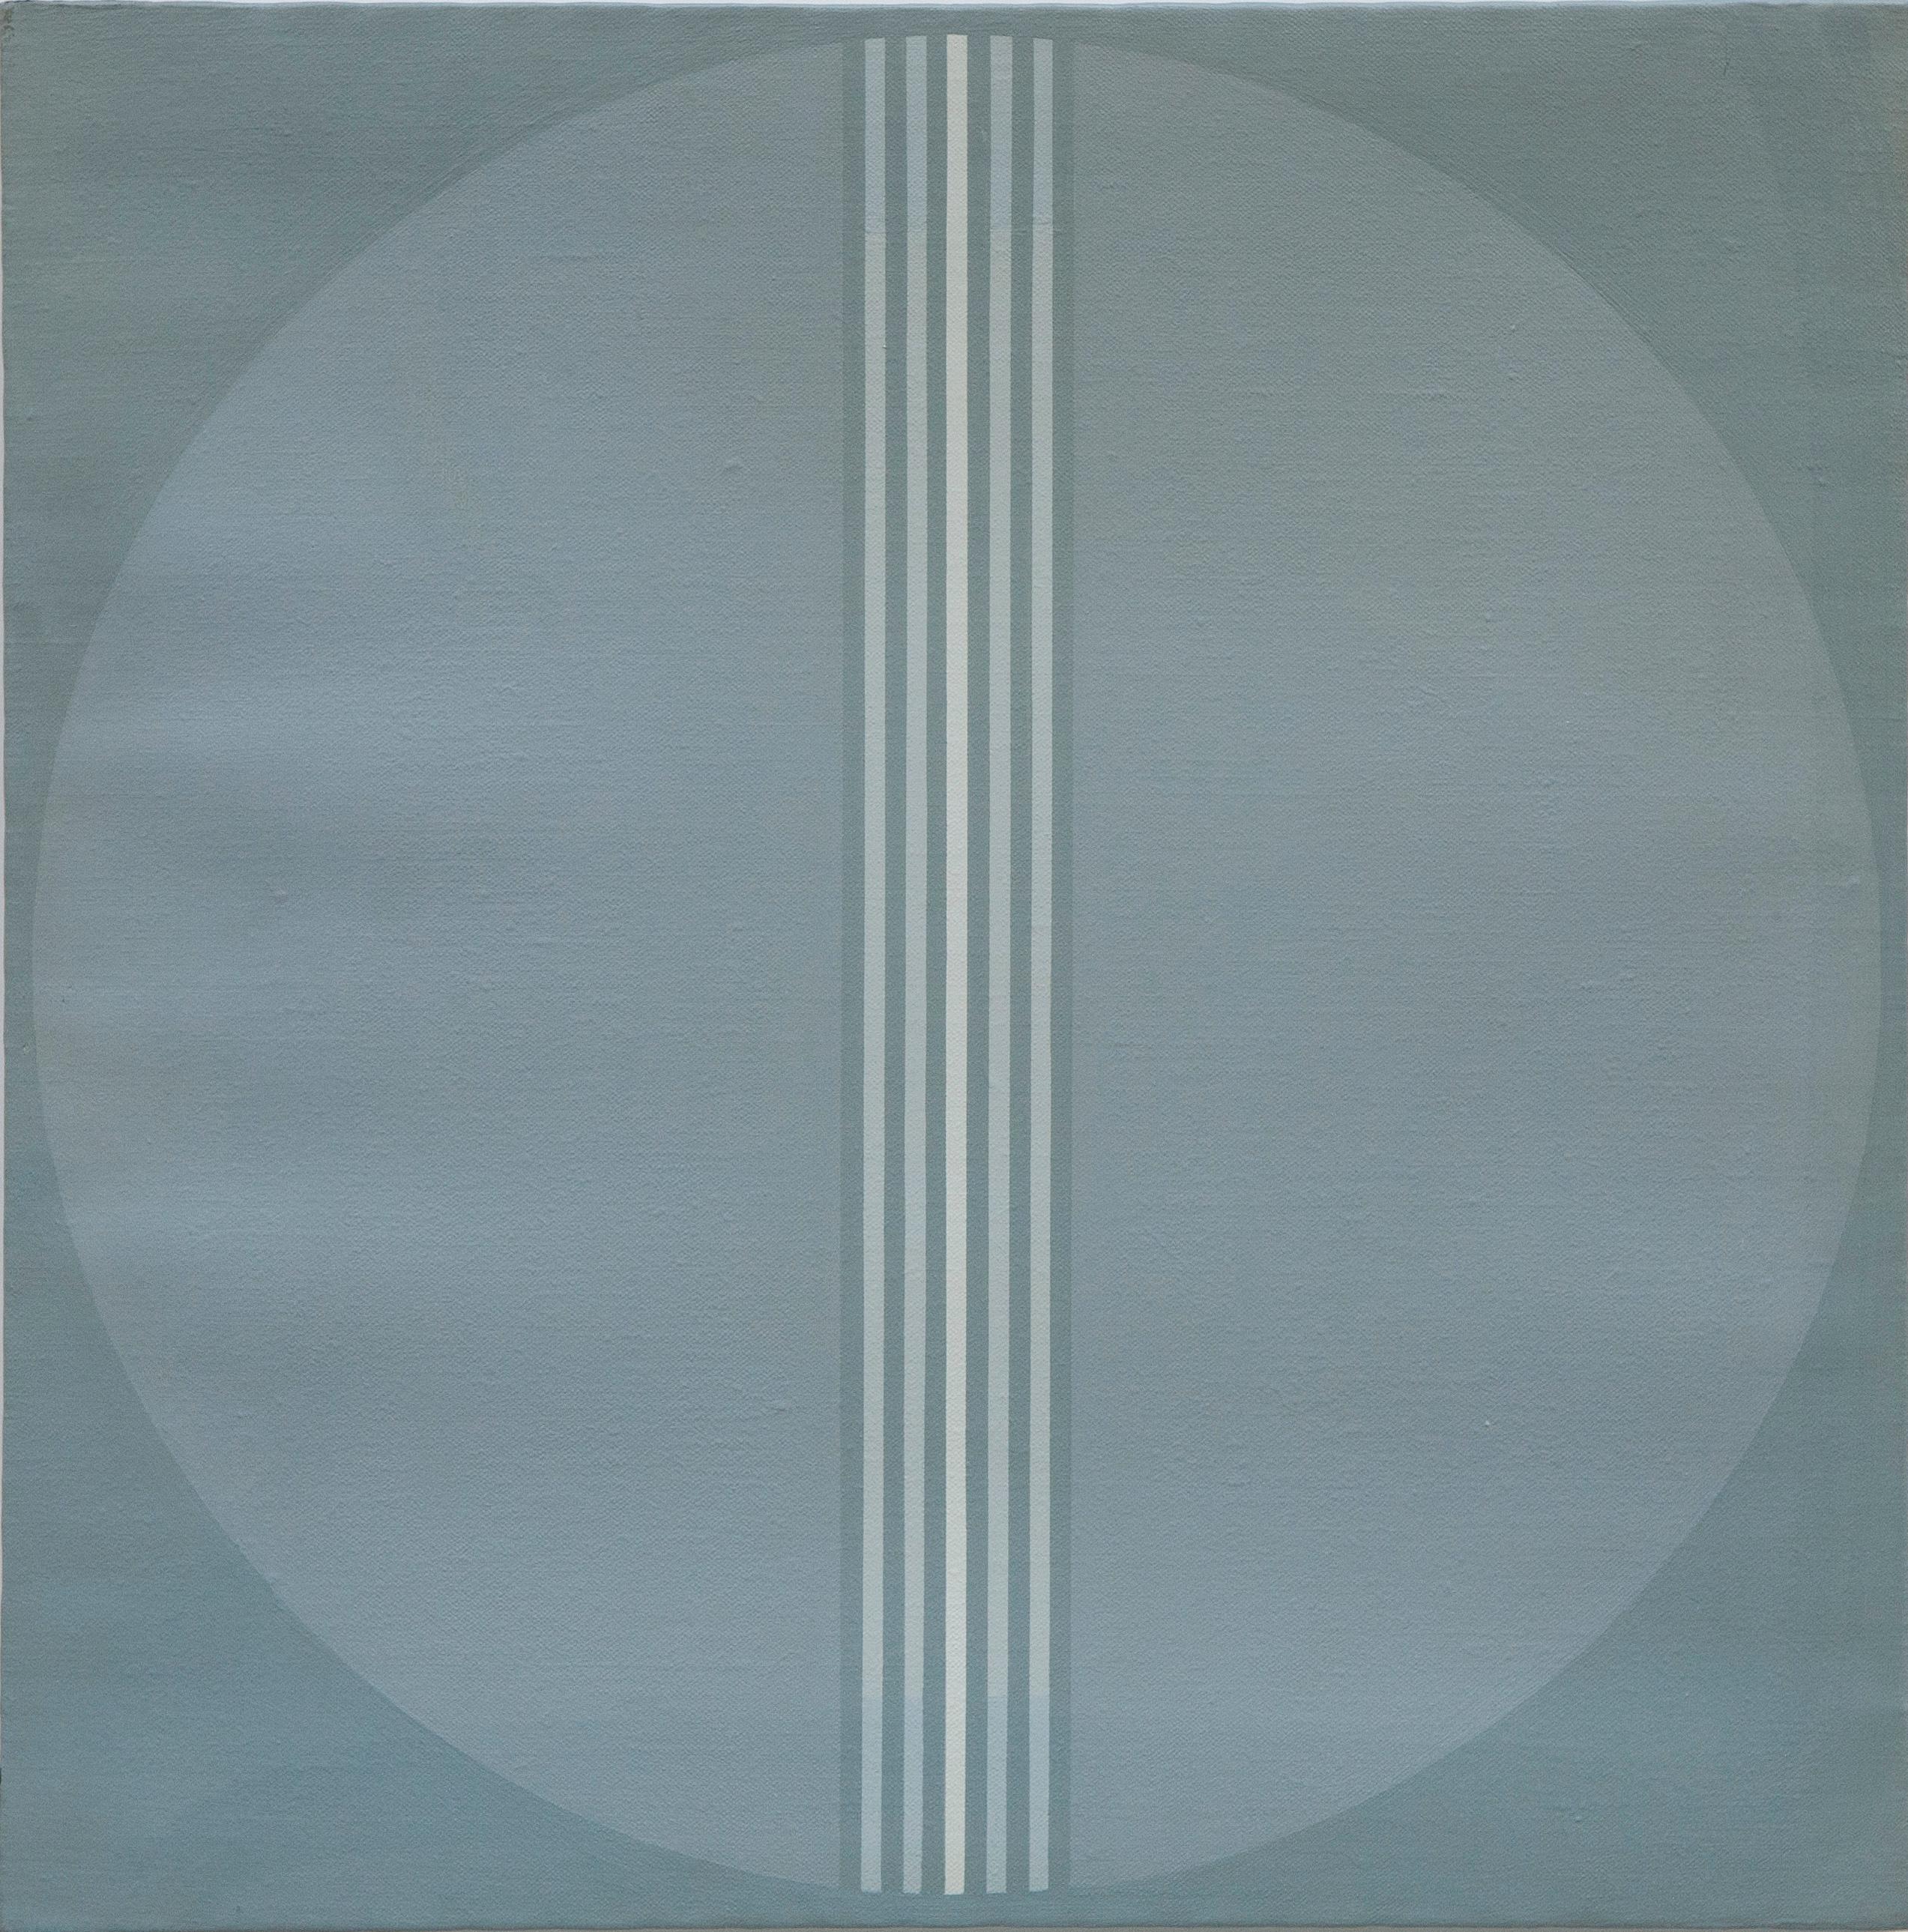 C.L.F.Q. composition no. 20 - Painting by Giuseppe Minoretti